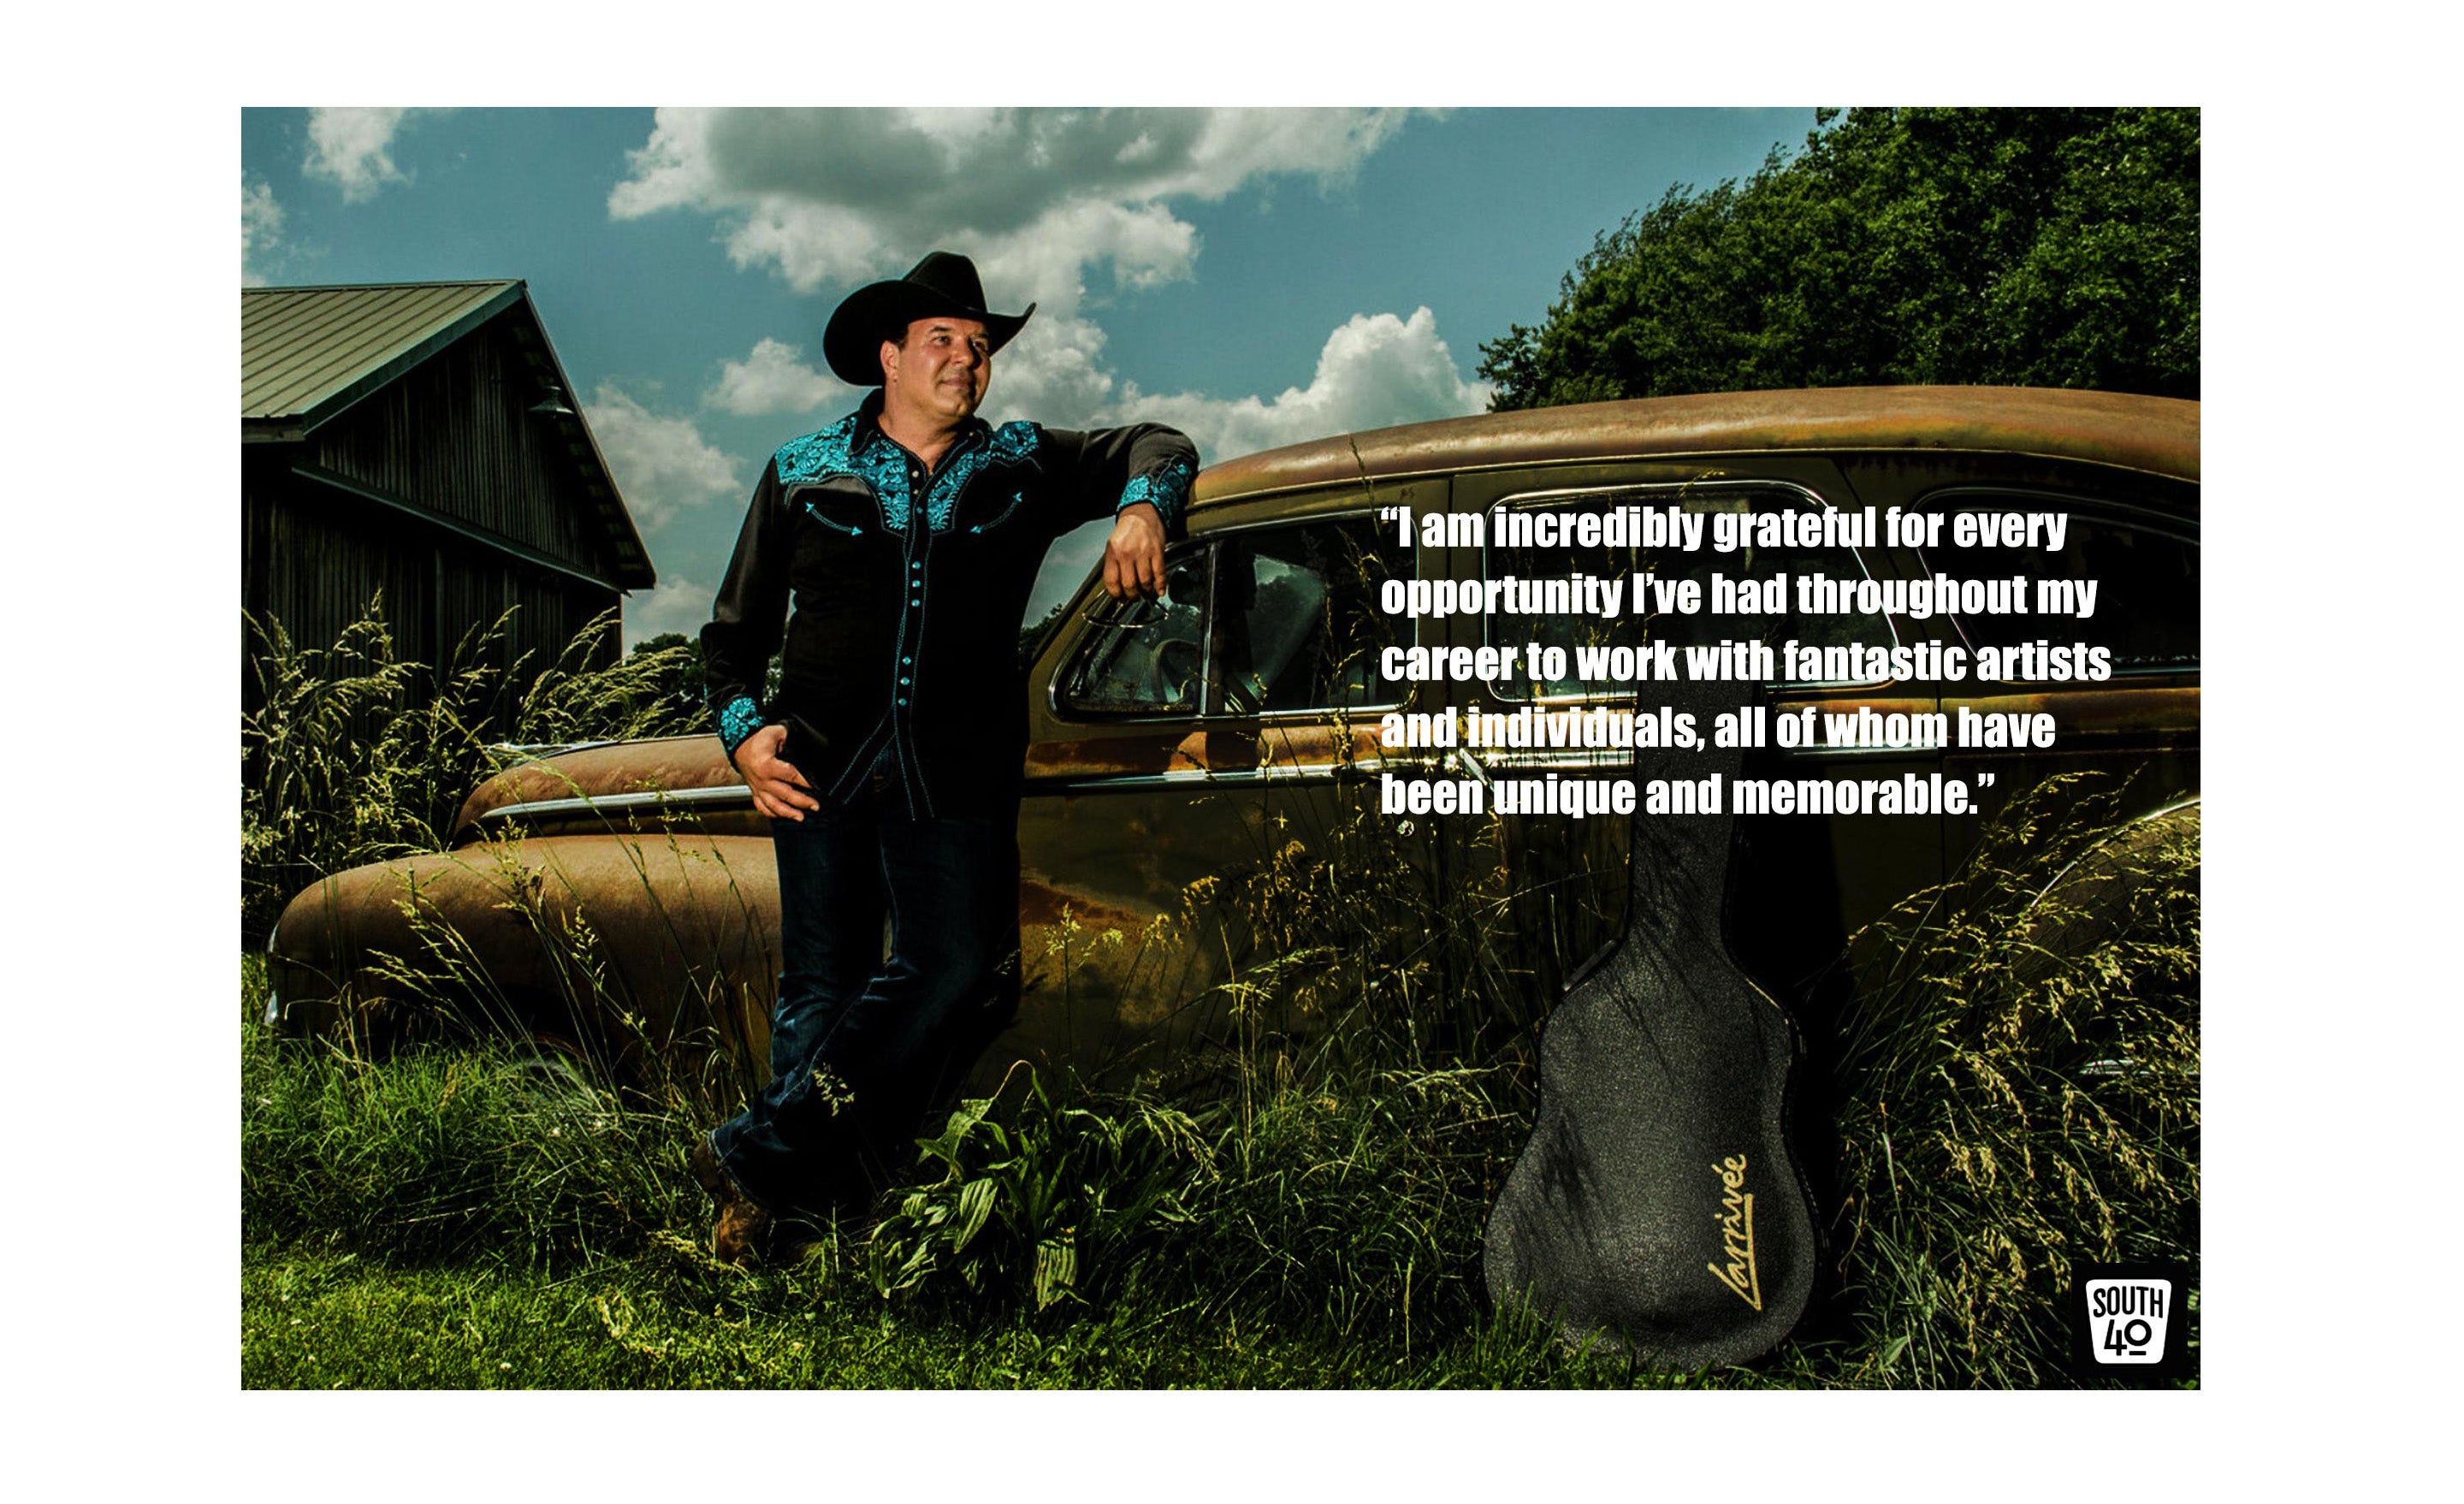 Los Angeles based portrait photographer Mark Maryanovich South 40 Creative Spotlight page 4 portrait country musician in cowboy hat leaning against vintage car parked in grass barn and blue sky with puffy clouds behind him